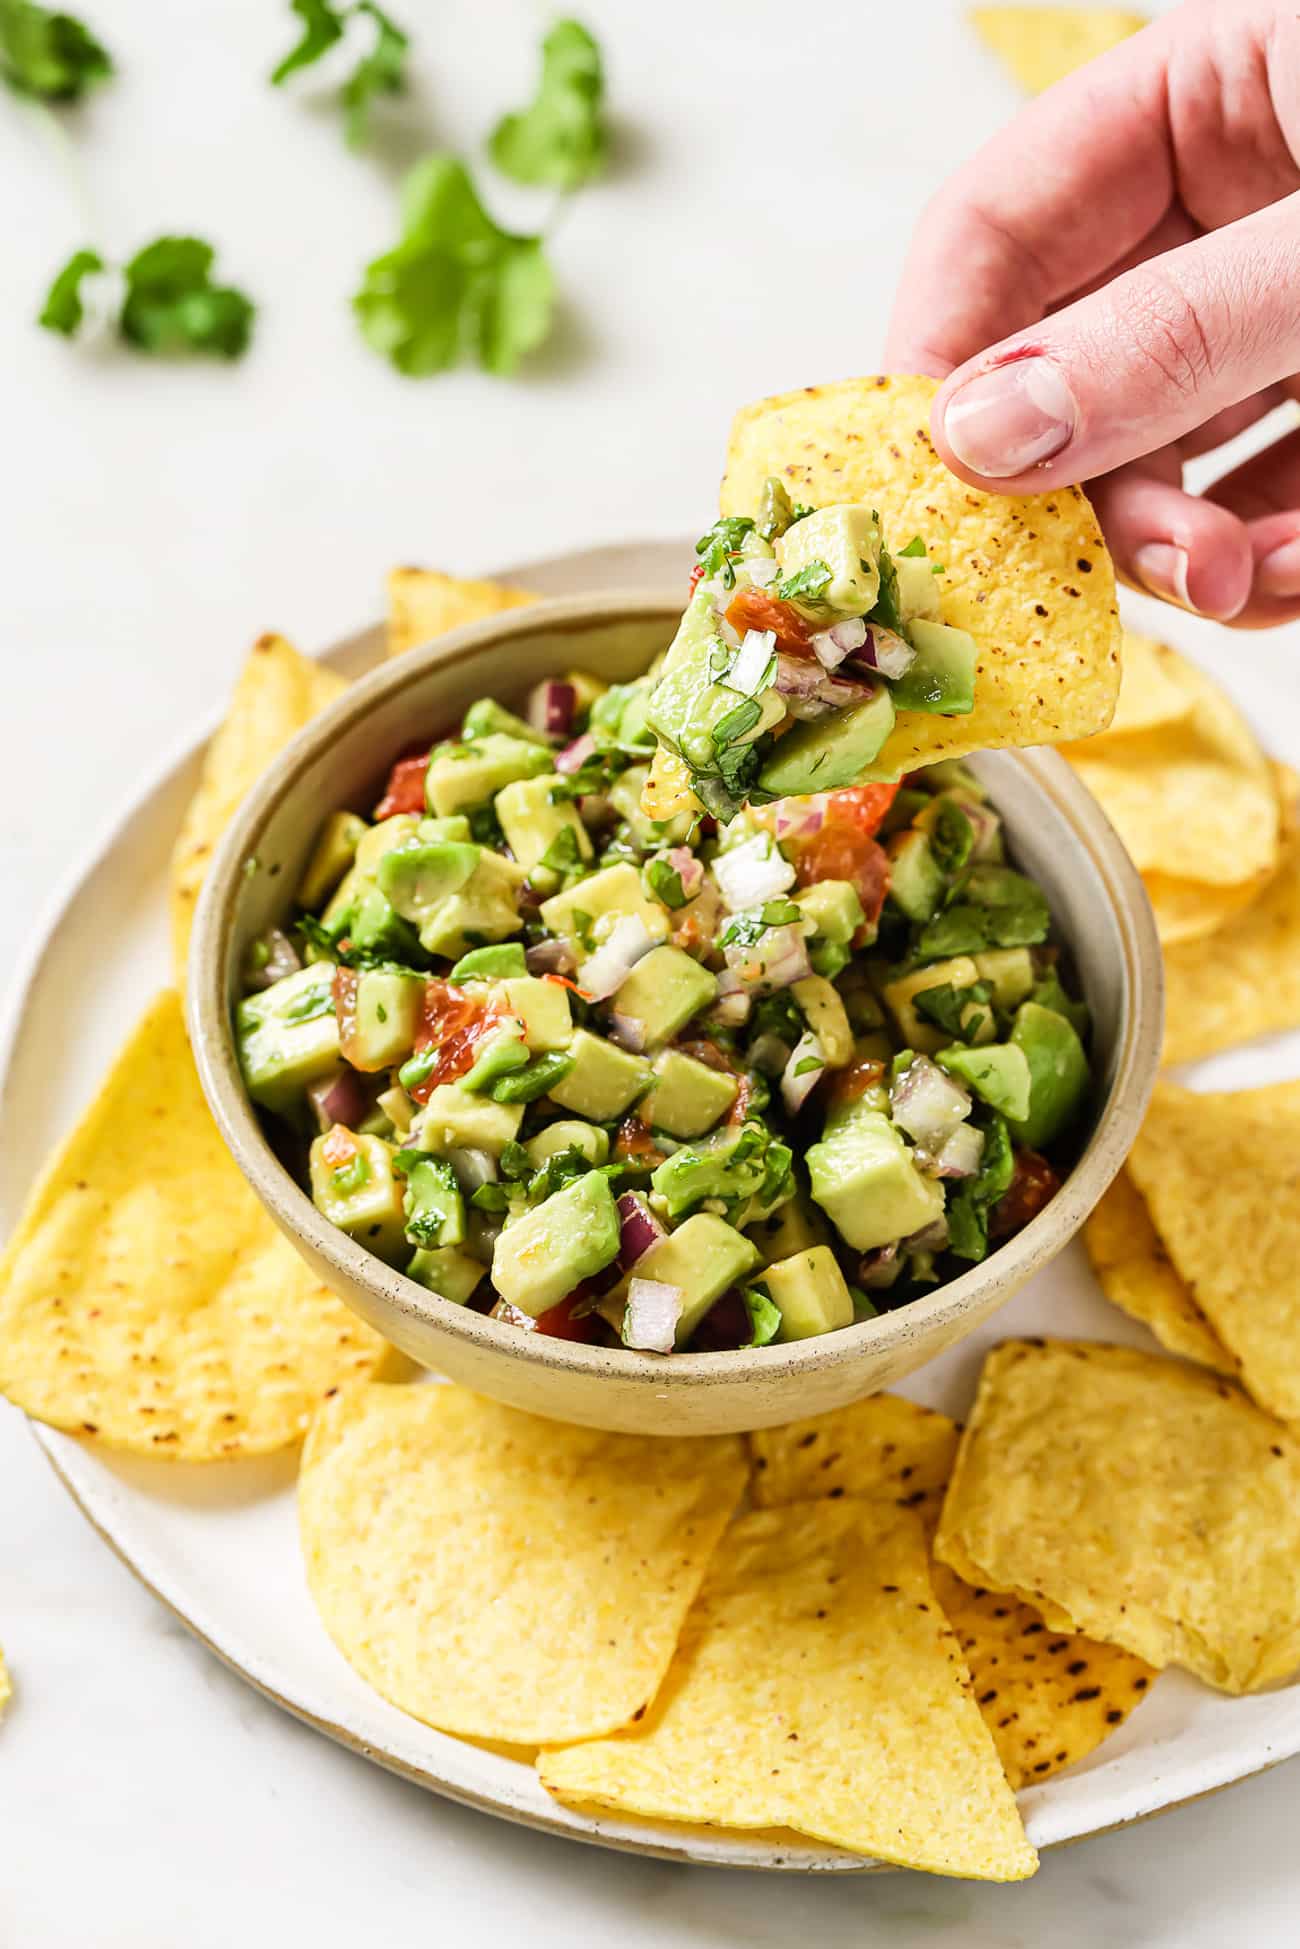 A bowl of avocado salsa on a plate of tortilla chips.